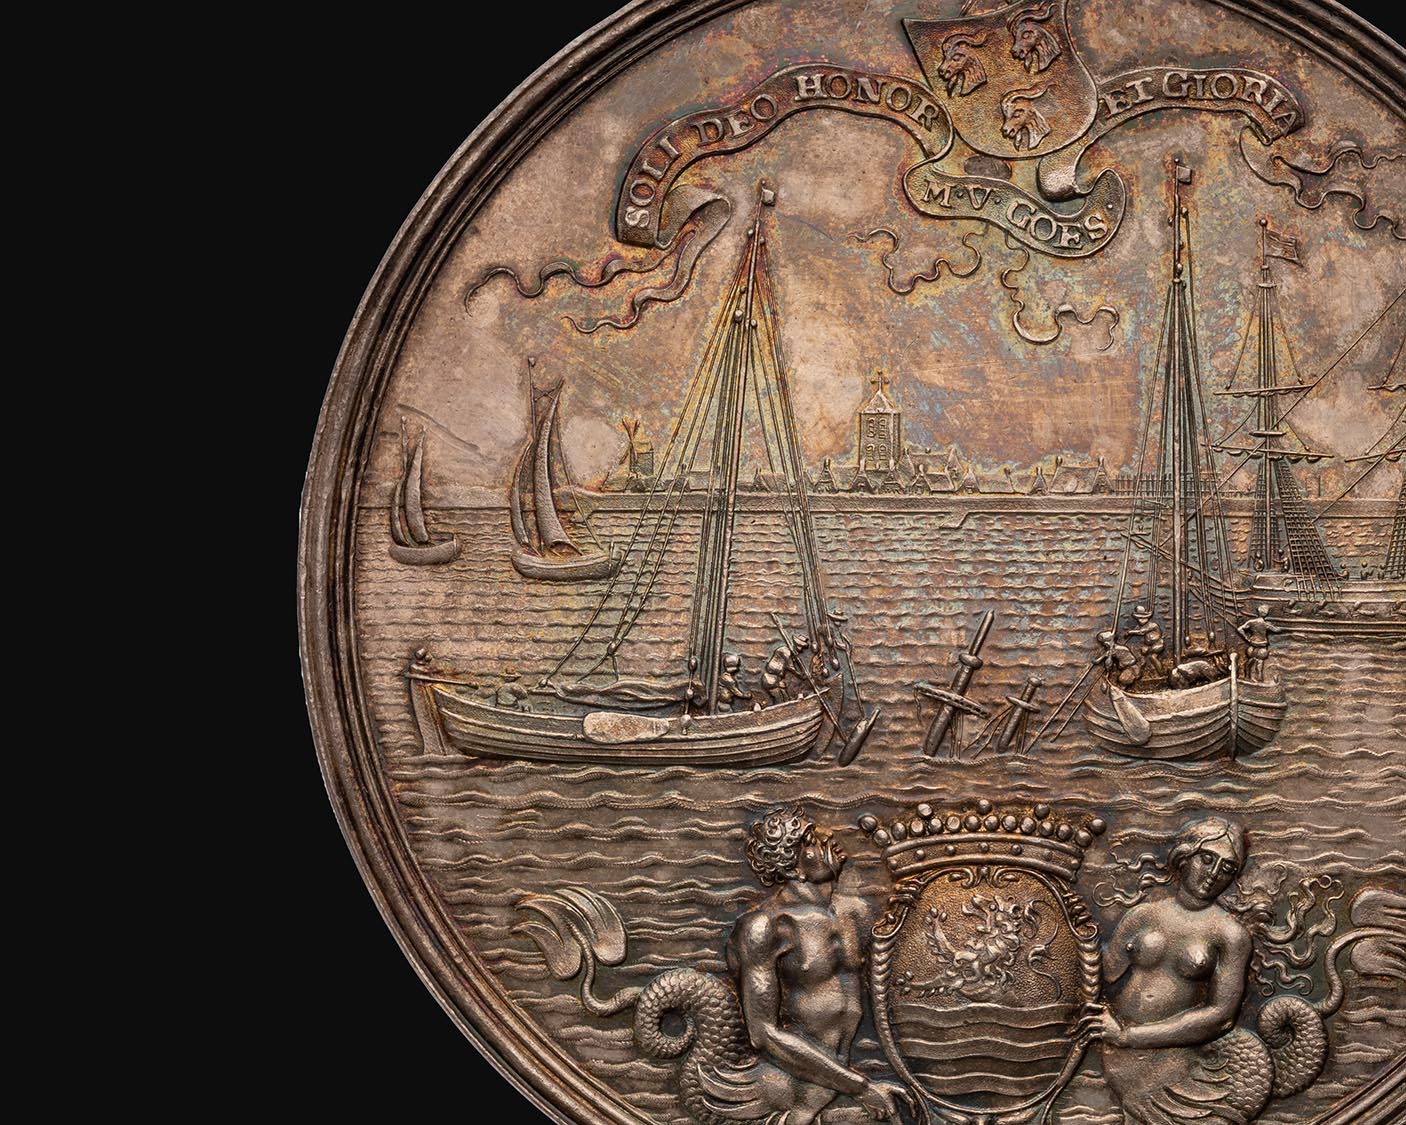 Long Table 169. Ships, Shipwrecks and Medals in the 17th Century